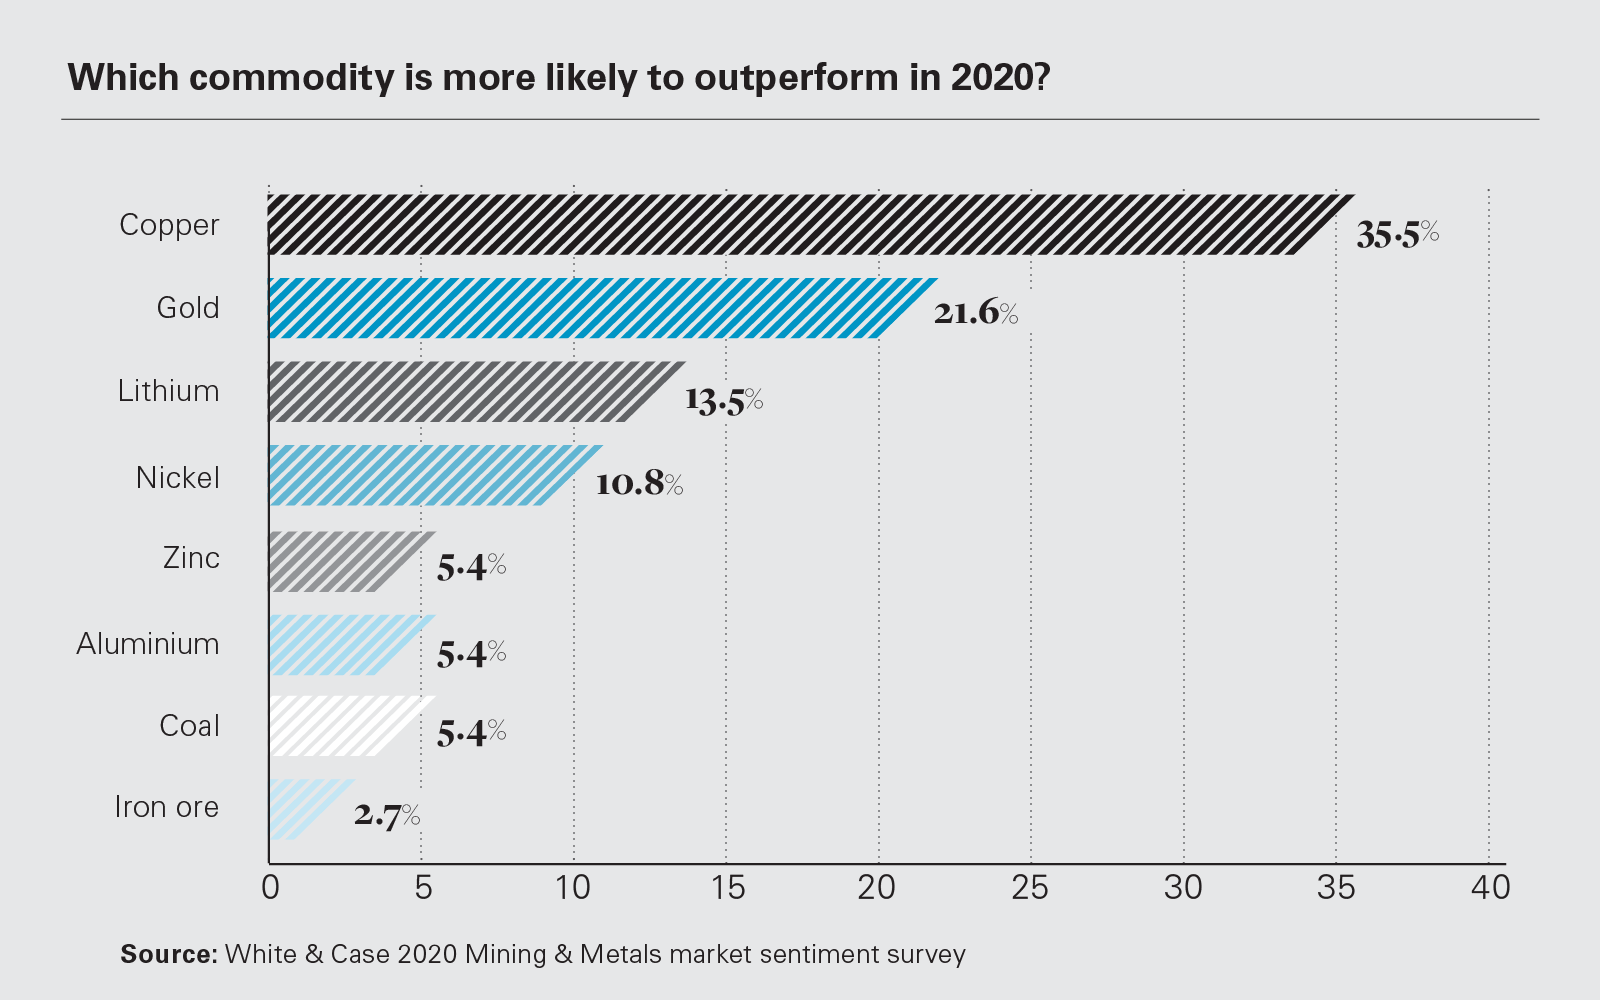 Which commodity is more likely to outperform in 2020?